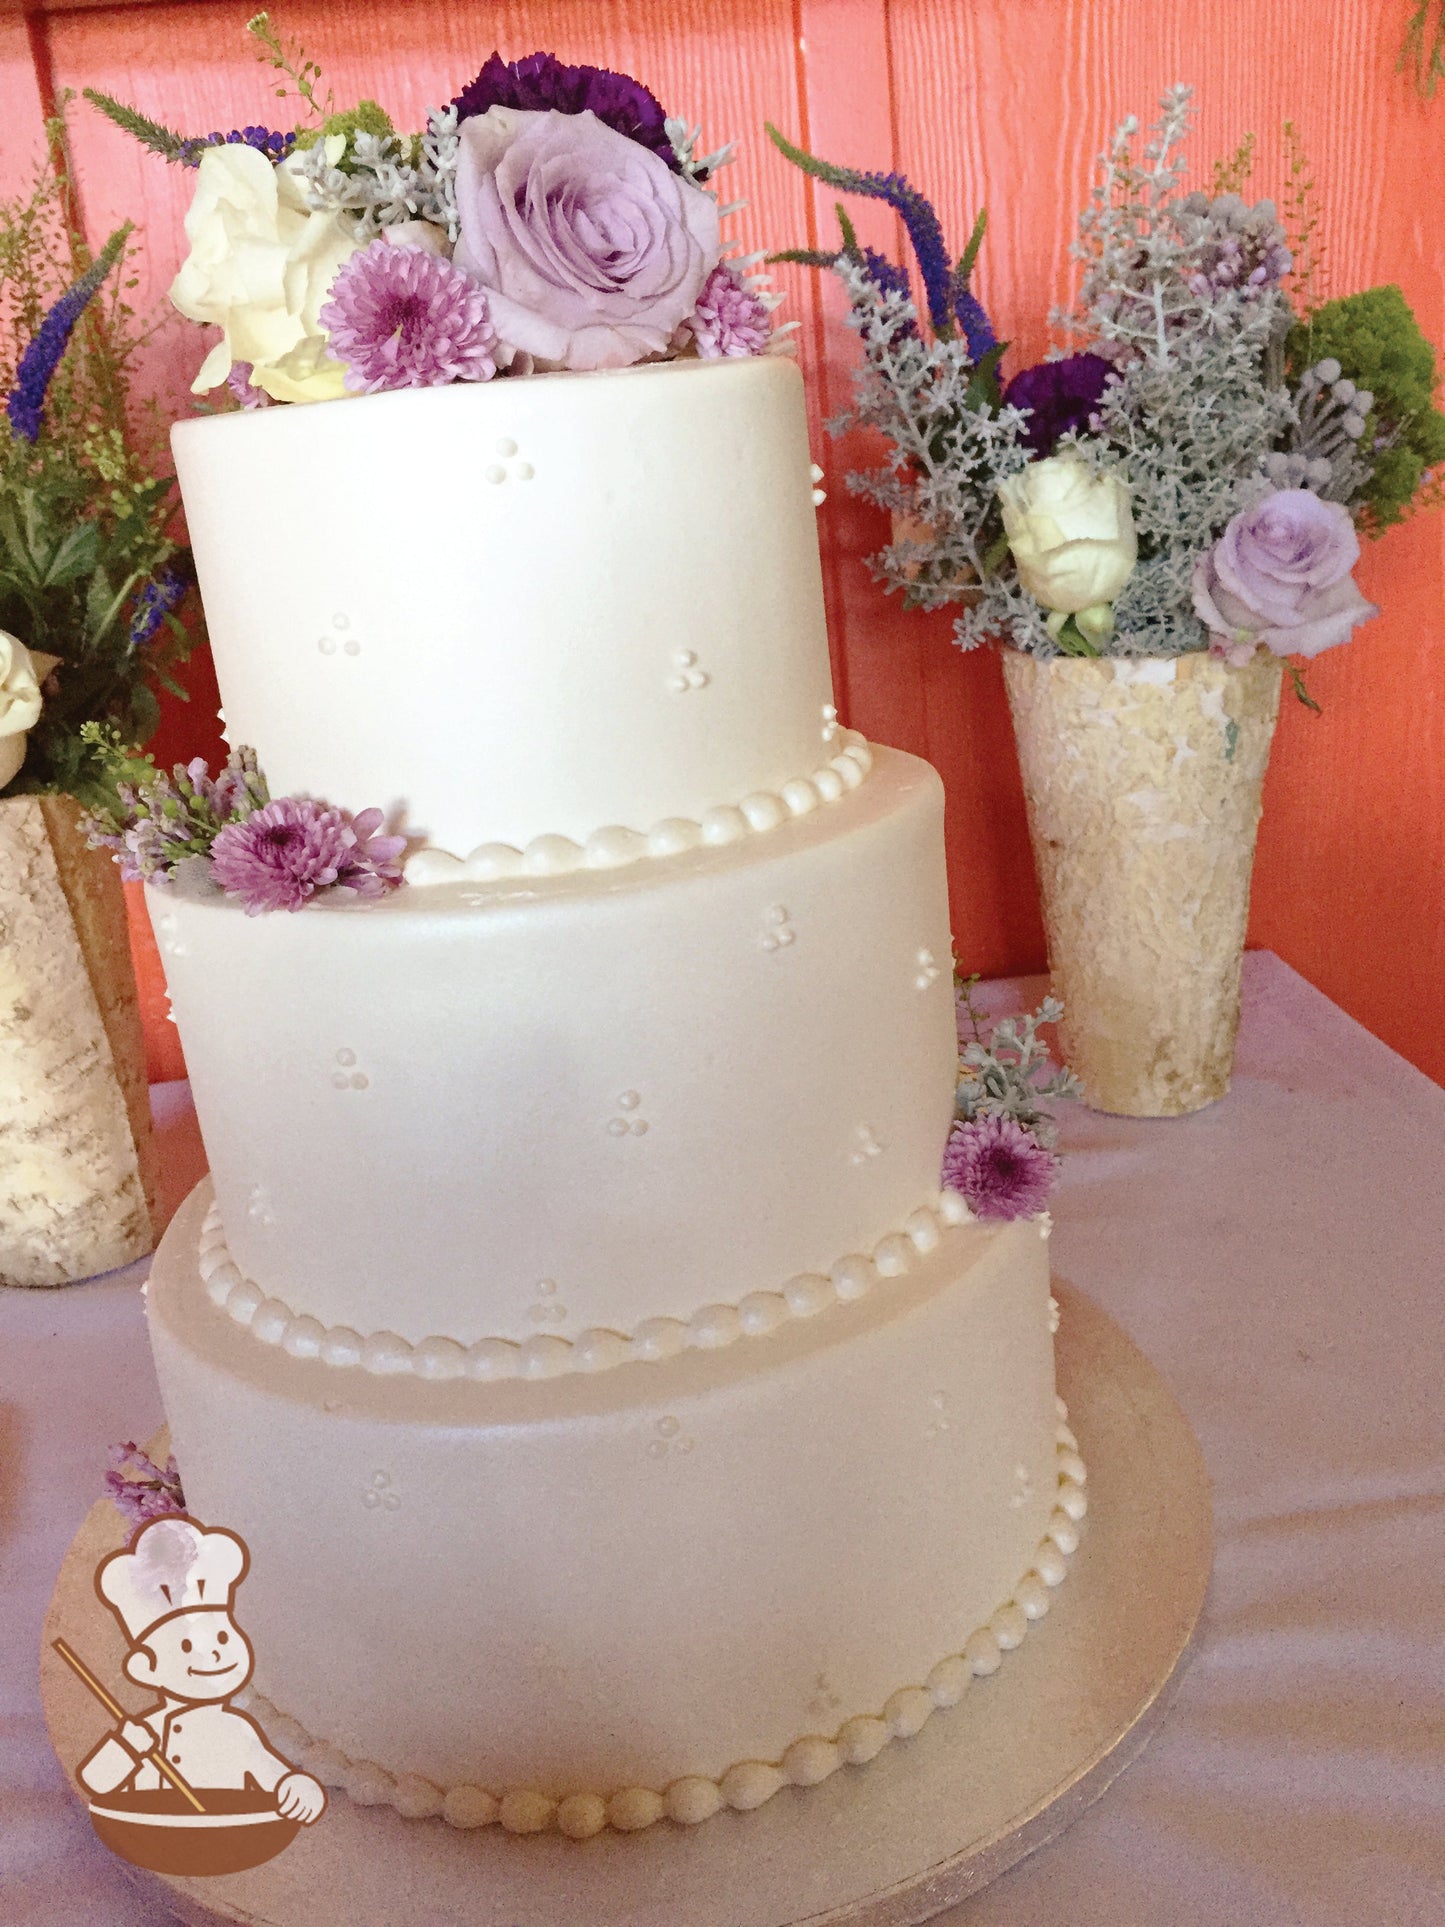 3-tier cake with smooth white icing and decorated with white buttercream tridot piping's and fresh flowers.